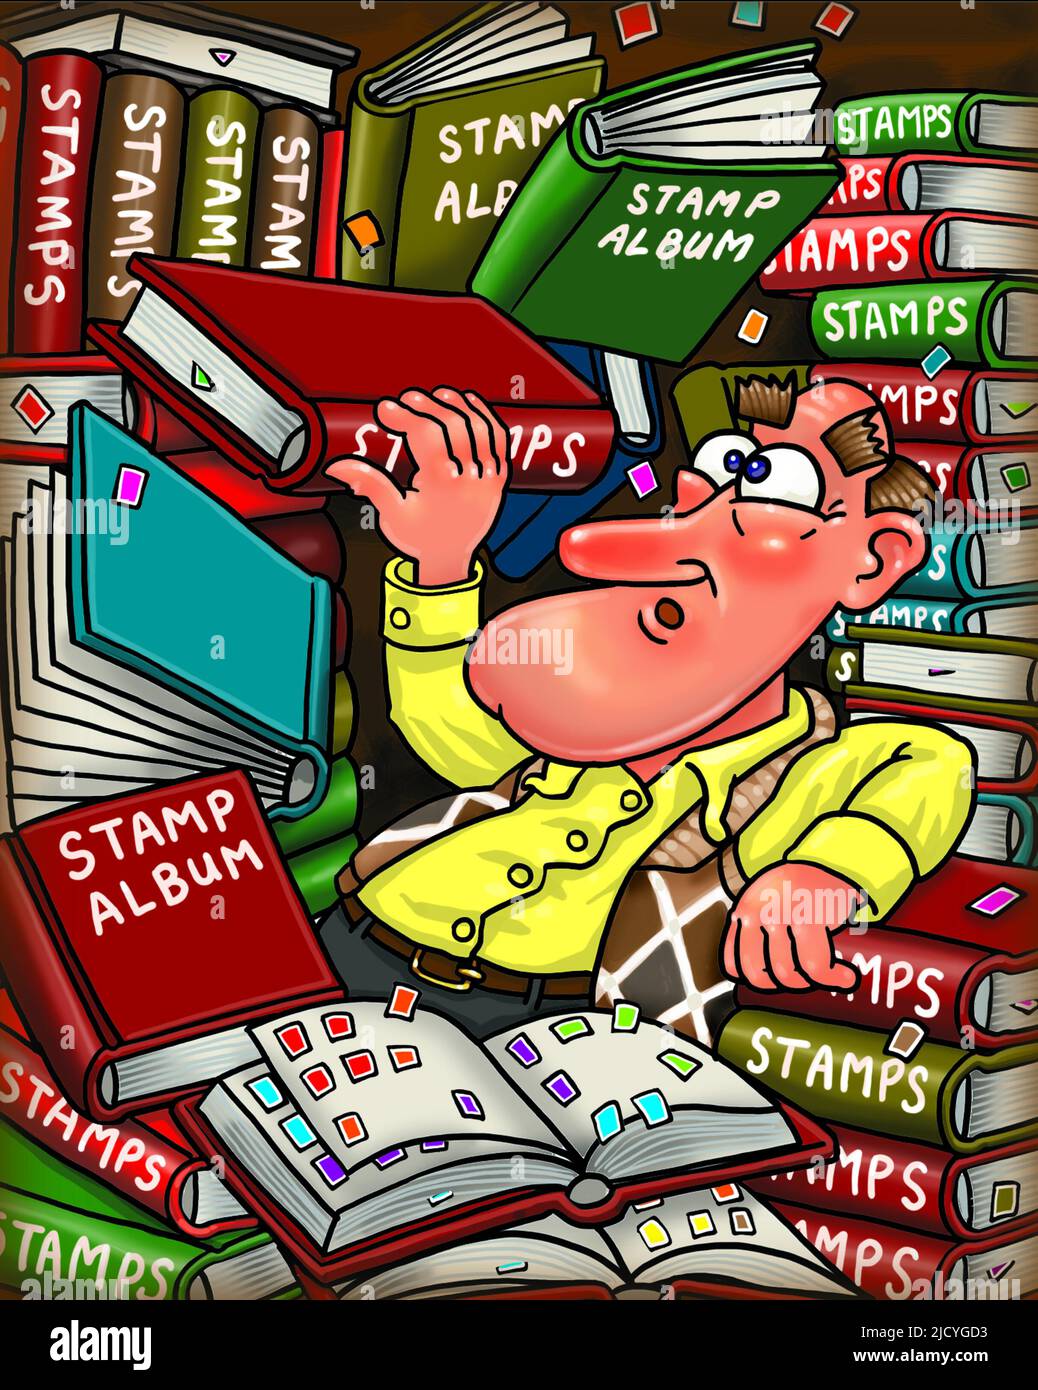 Art cartoon man surrounded by piles of stamp albums, illustrating philately, the fun of collecting, importance of sorting keeping a collection ordered Stock Photo